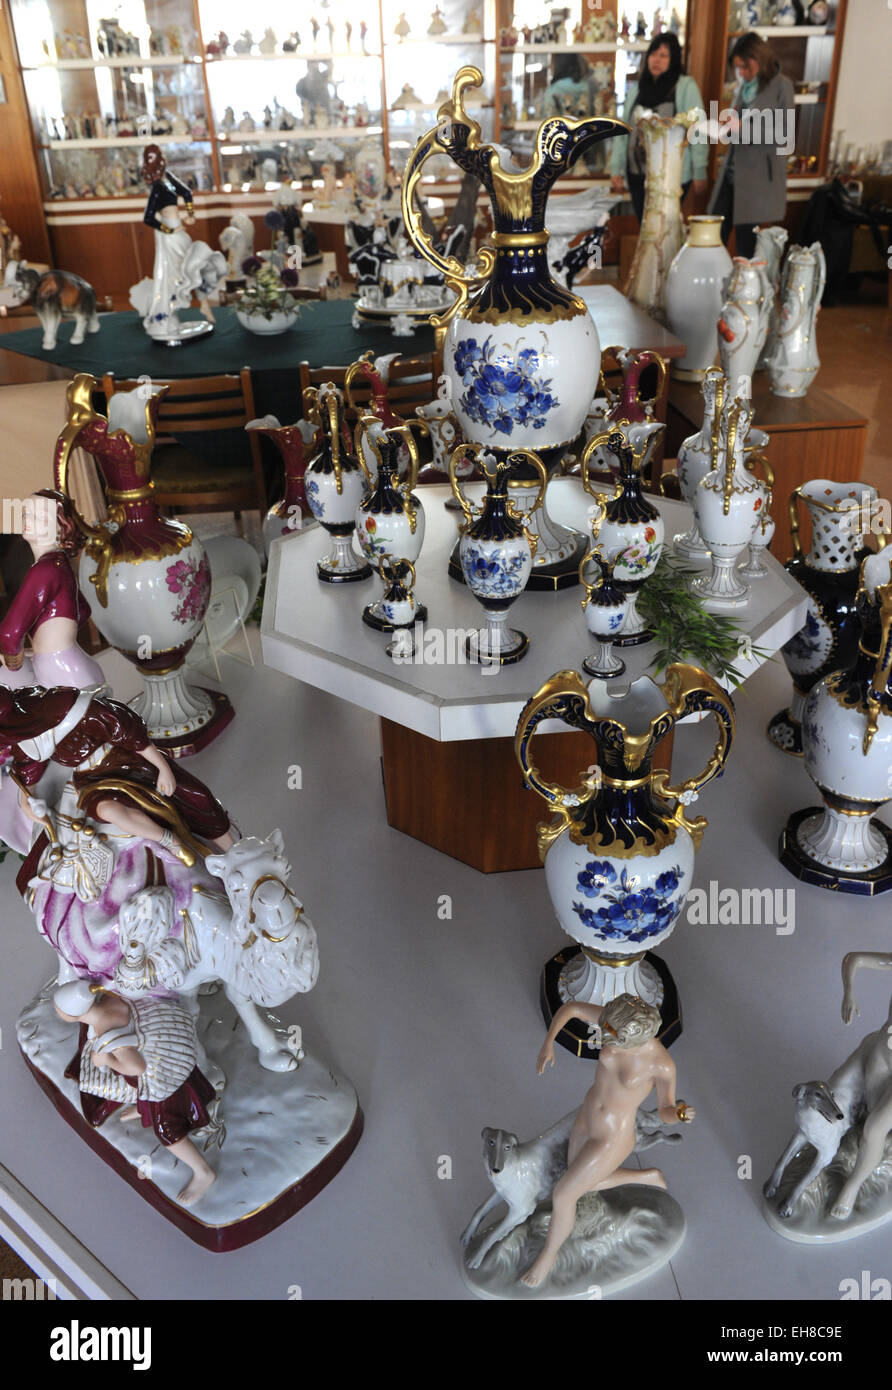 Royal Dux, a Czech producer of figurative porcelain, acquired new ...